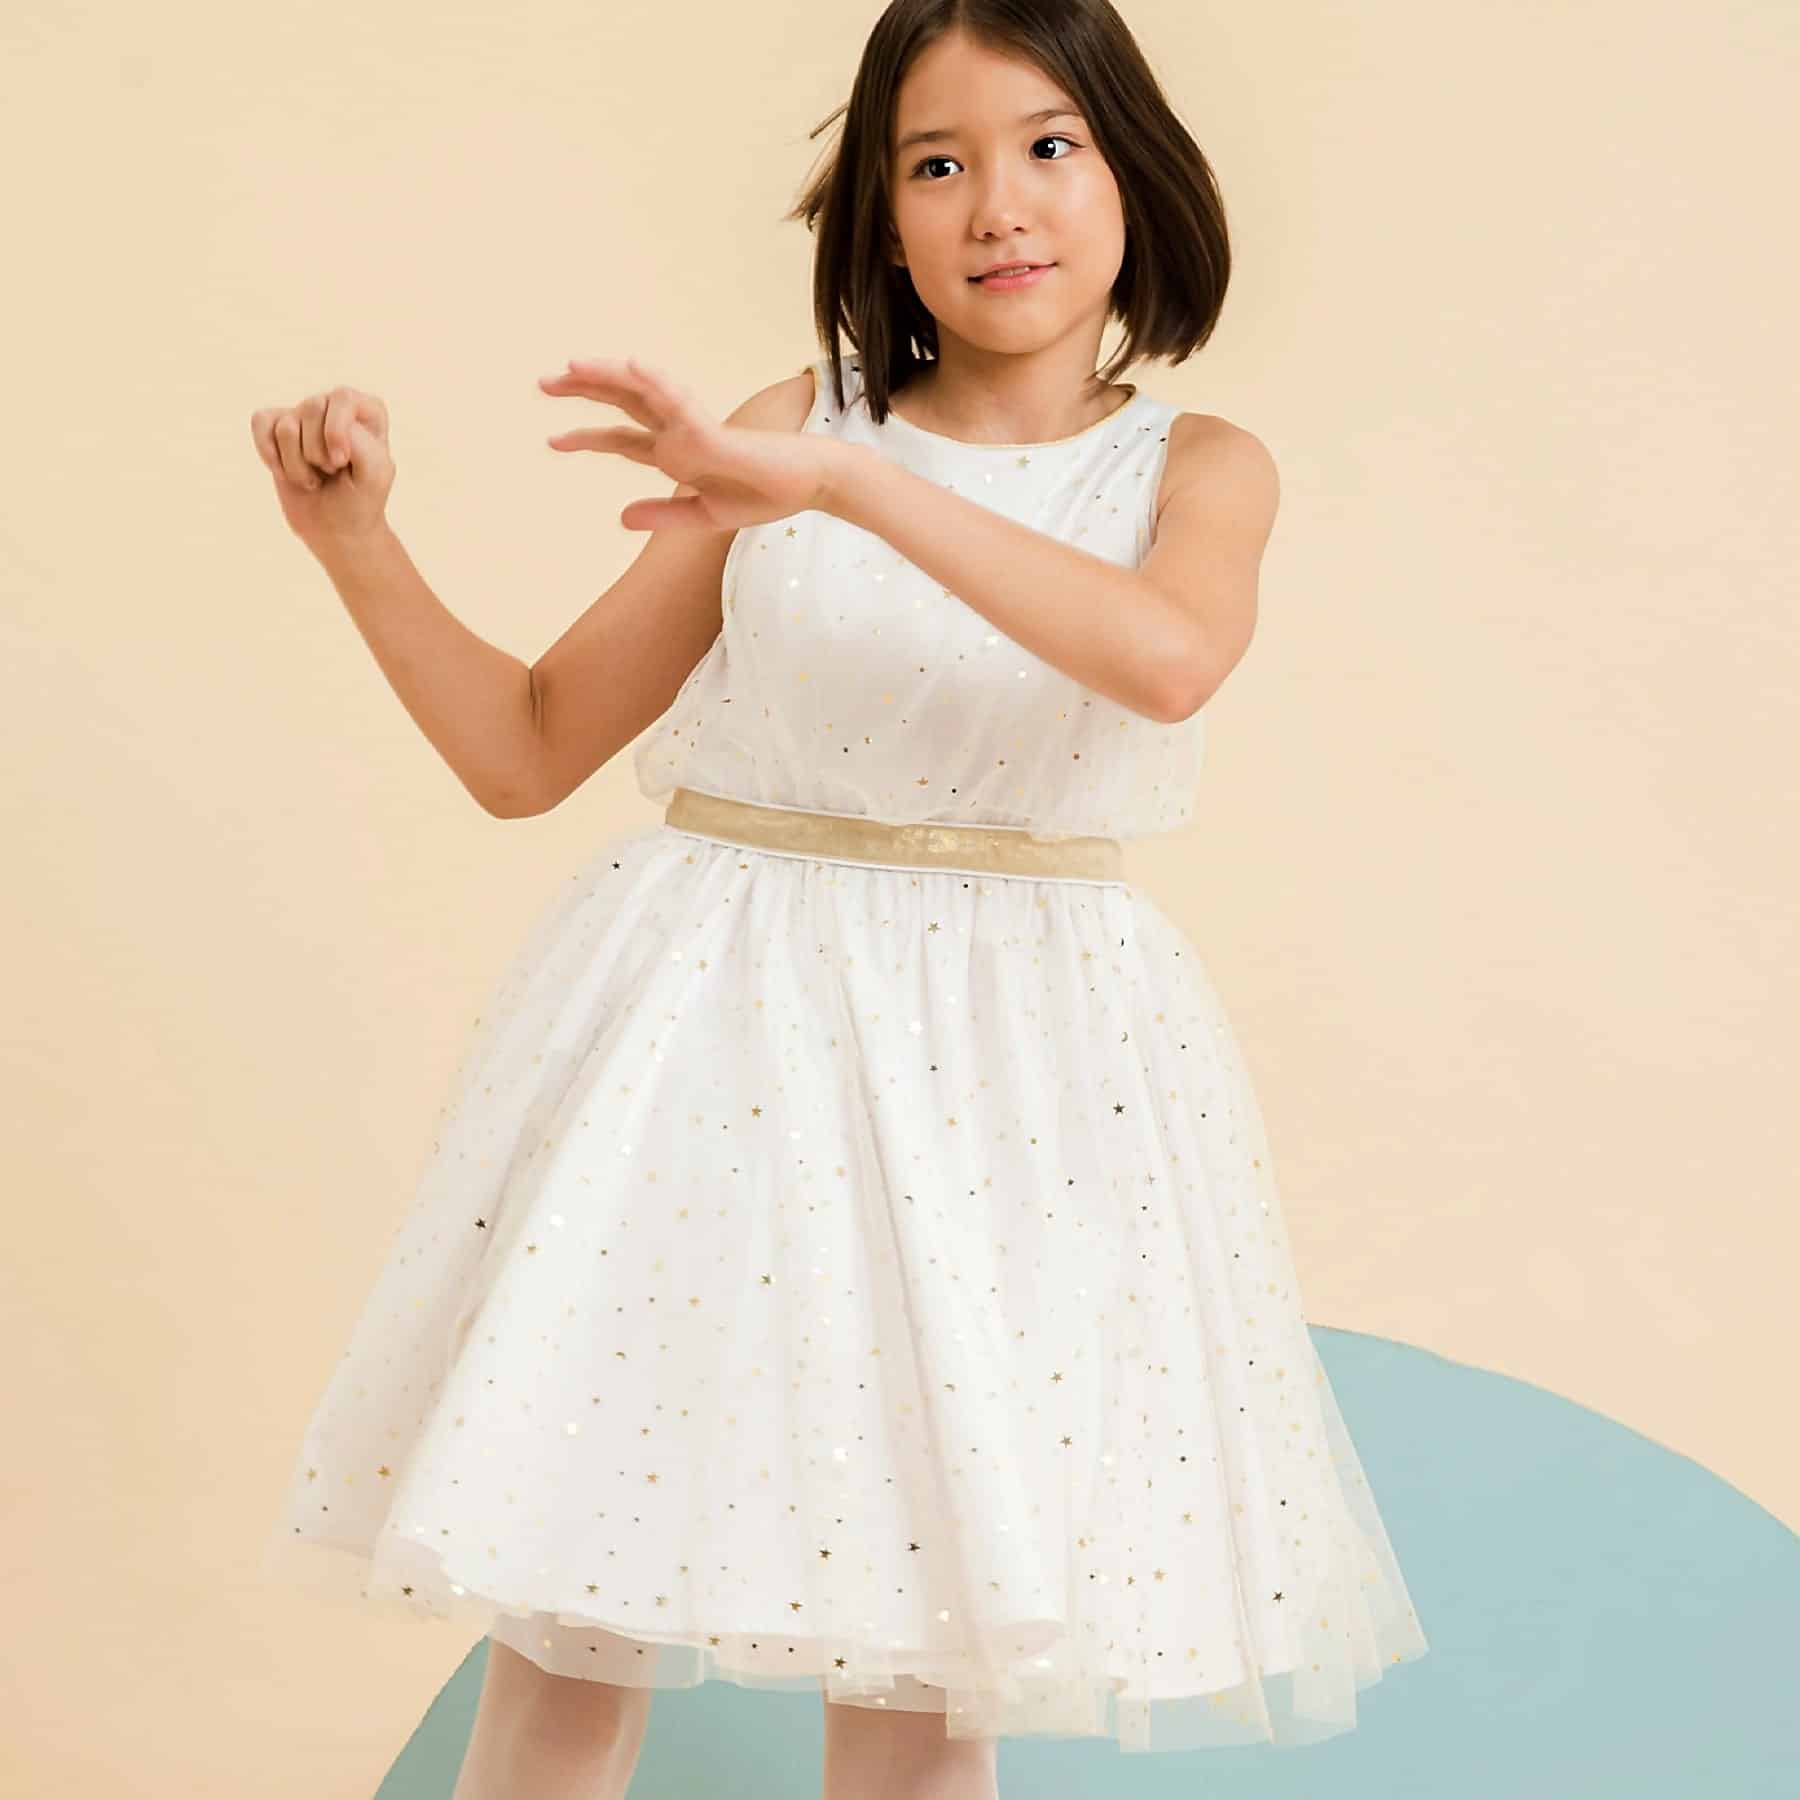 White cotton and tulle evening dress with golden stars from the children's fashion brand La Faute à Voltaire